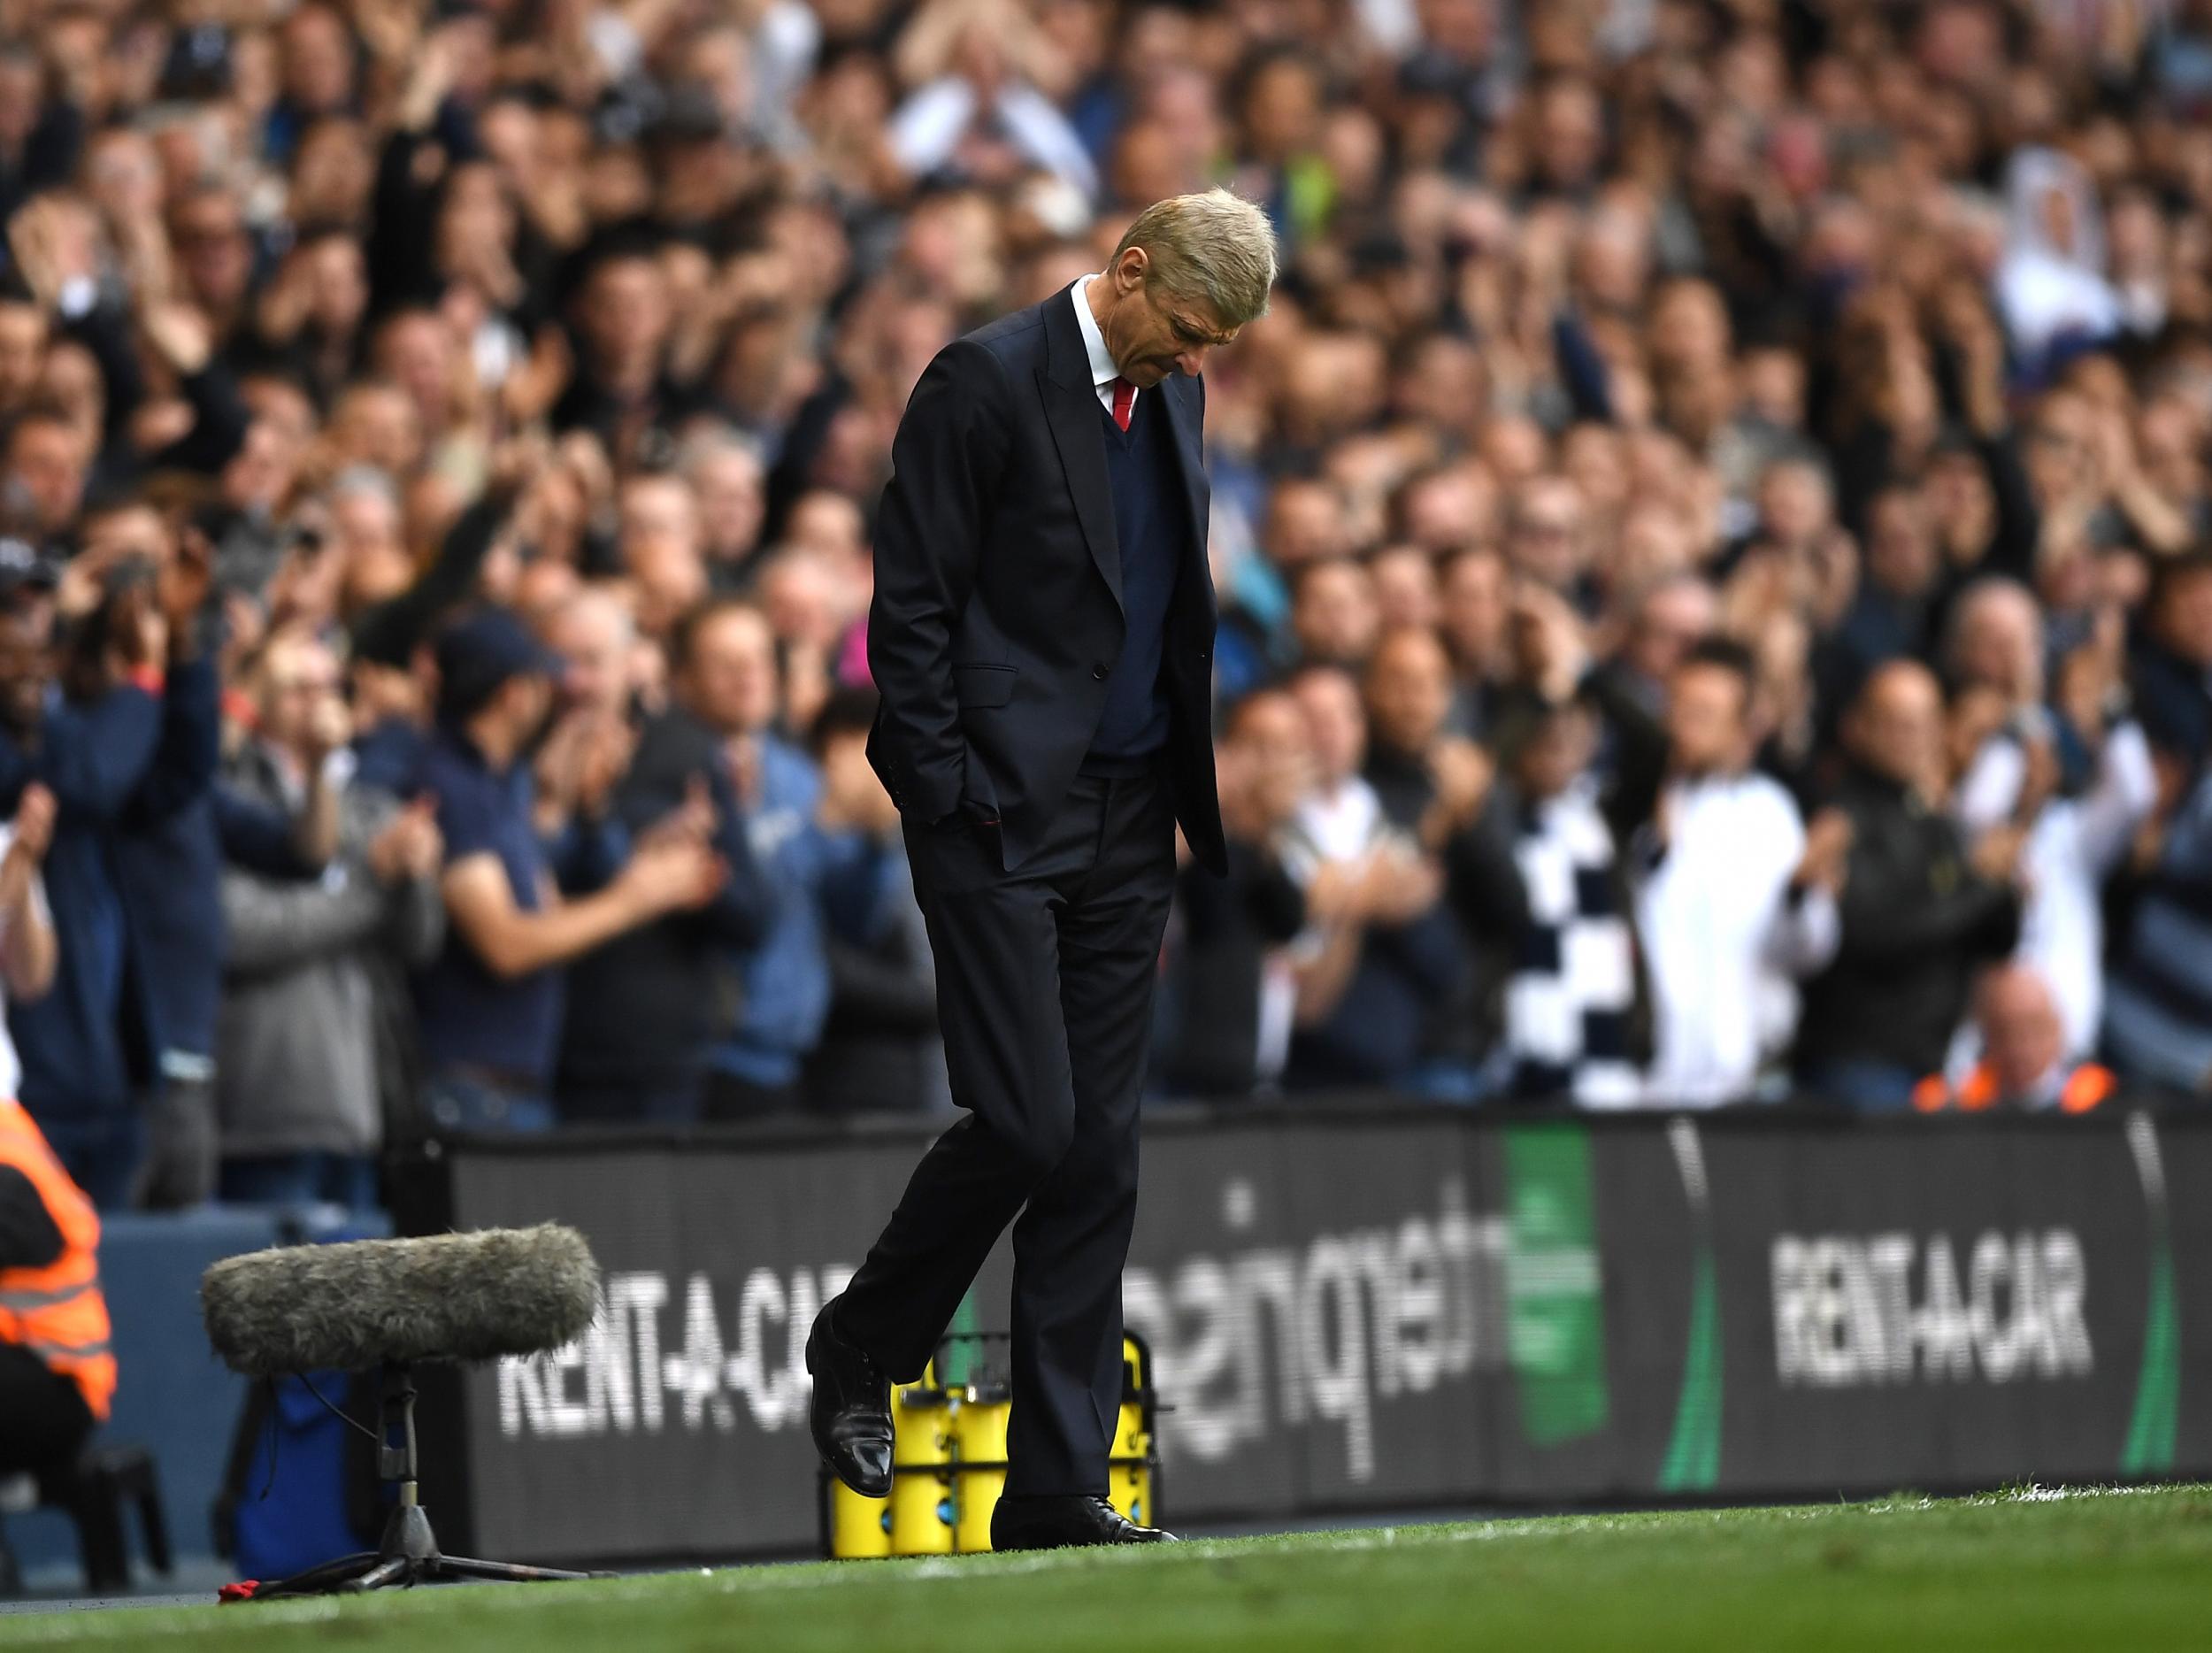 Wenger's side were comprehensively outplayed